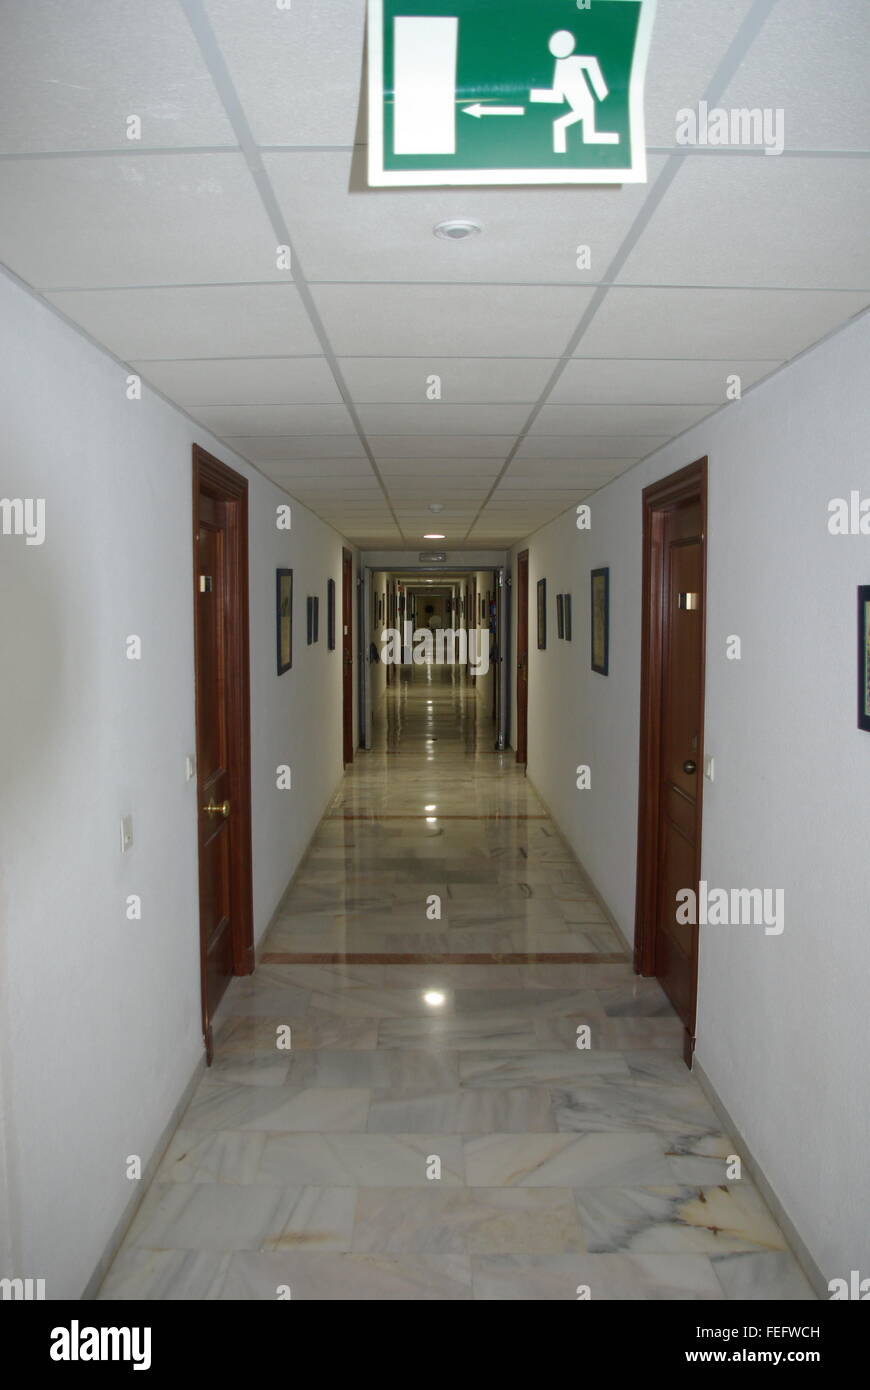 Hotel corridor with emergency exit sign Stock Photo